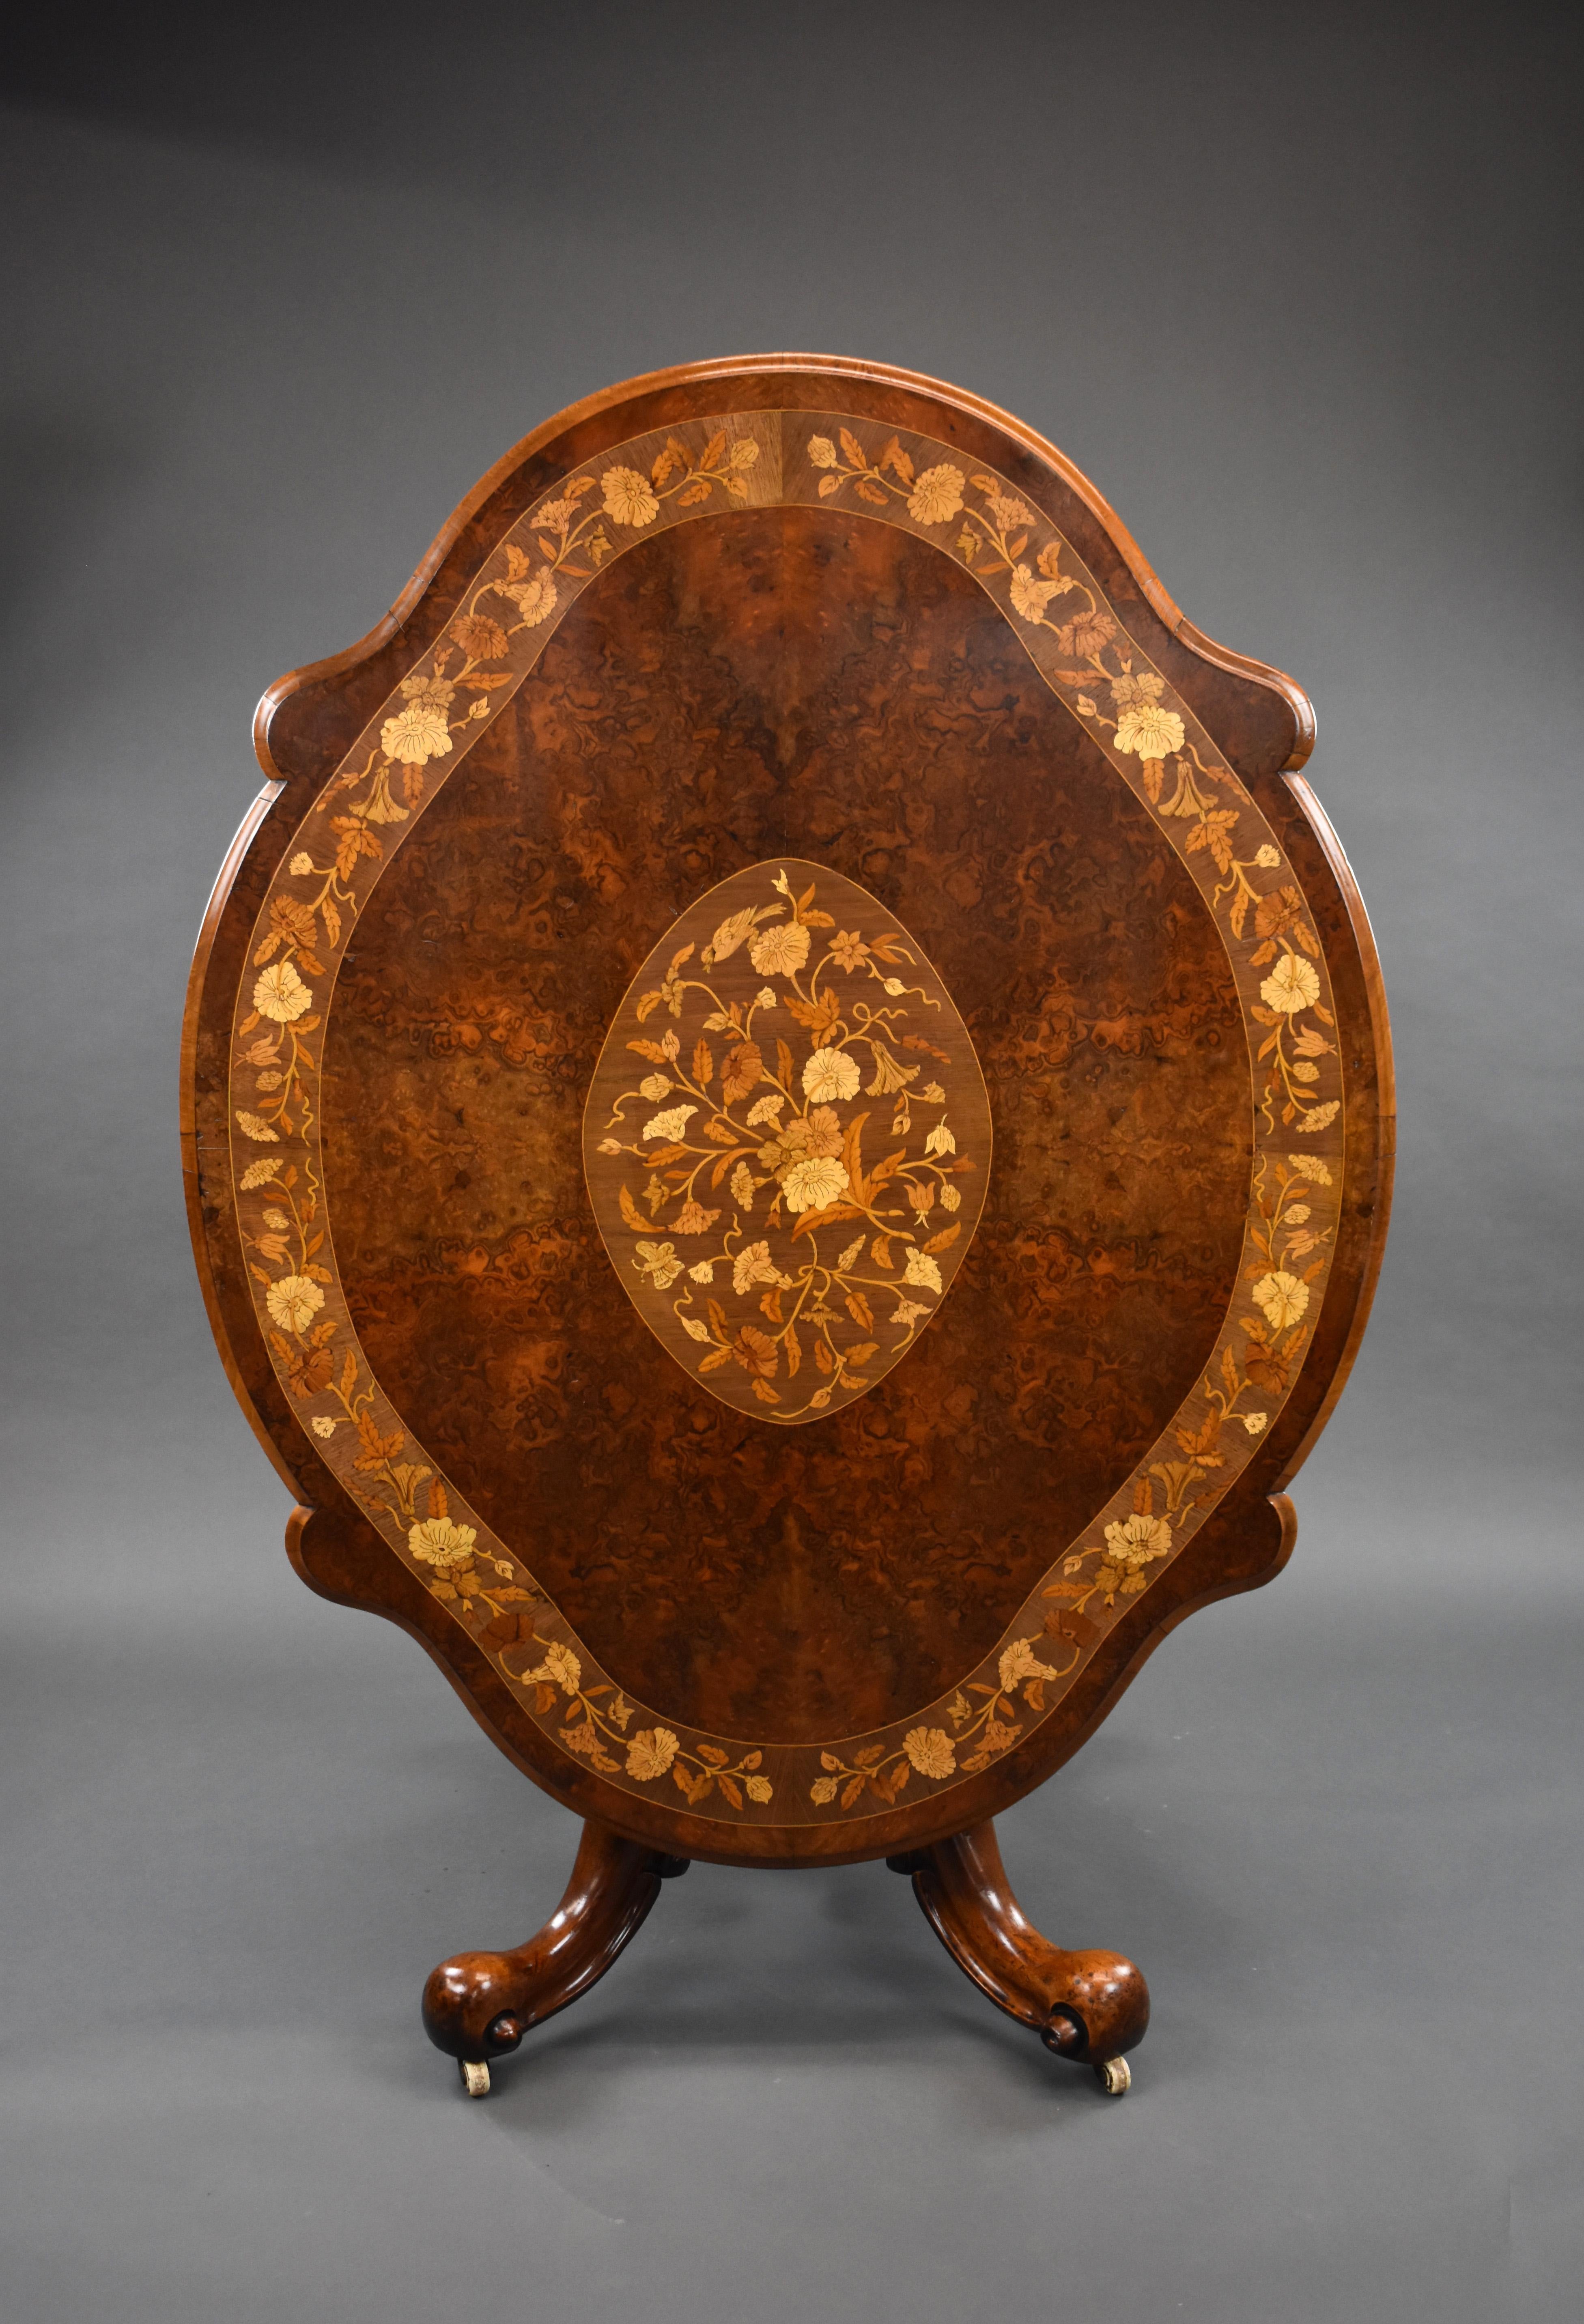 A good quality Victorian burr walnut marquetry breakfast table, the shaped top being profusely inlaid with floral marquetry around the edge, and an inlaid panel to the centre, above a turned and carved base standing on elegantly legs raised on